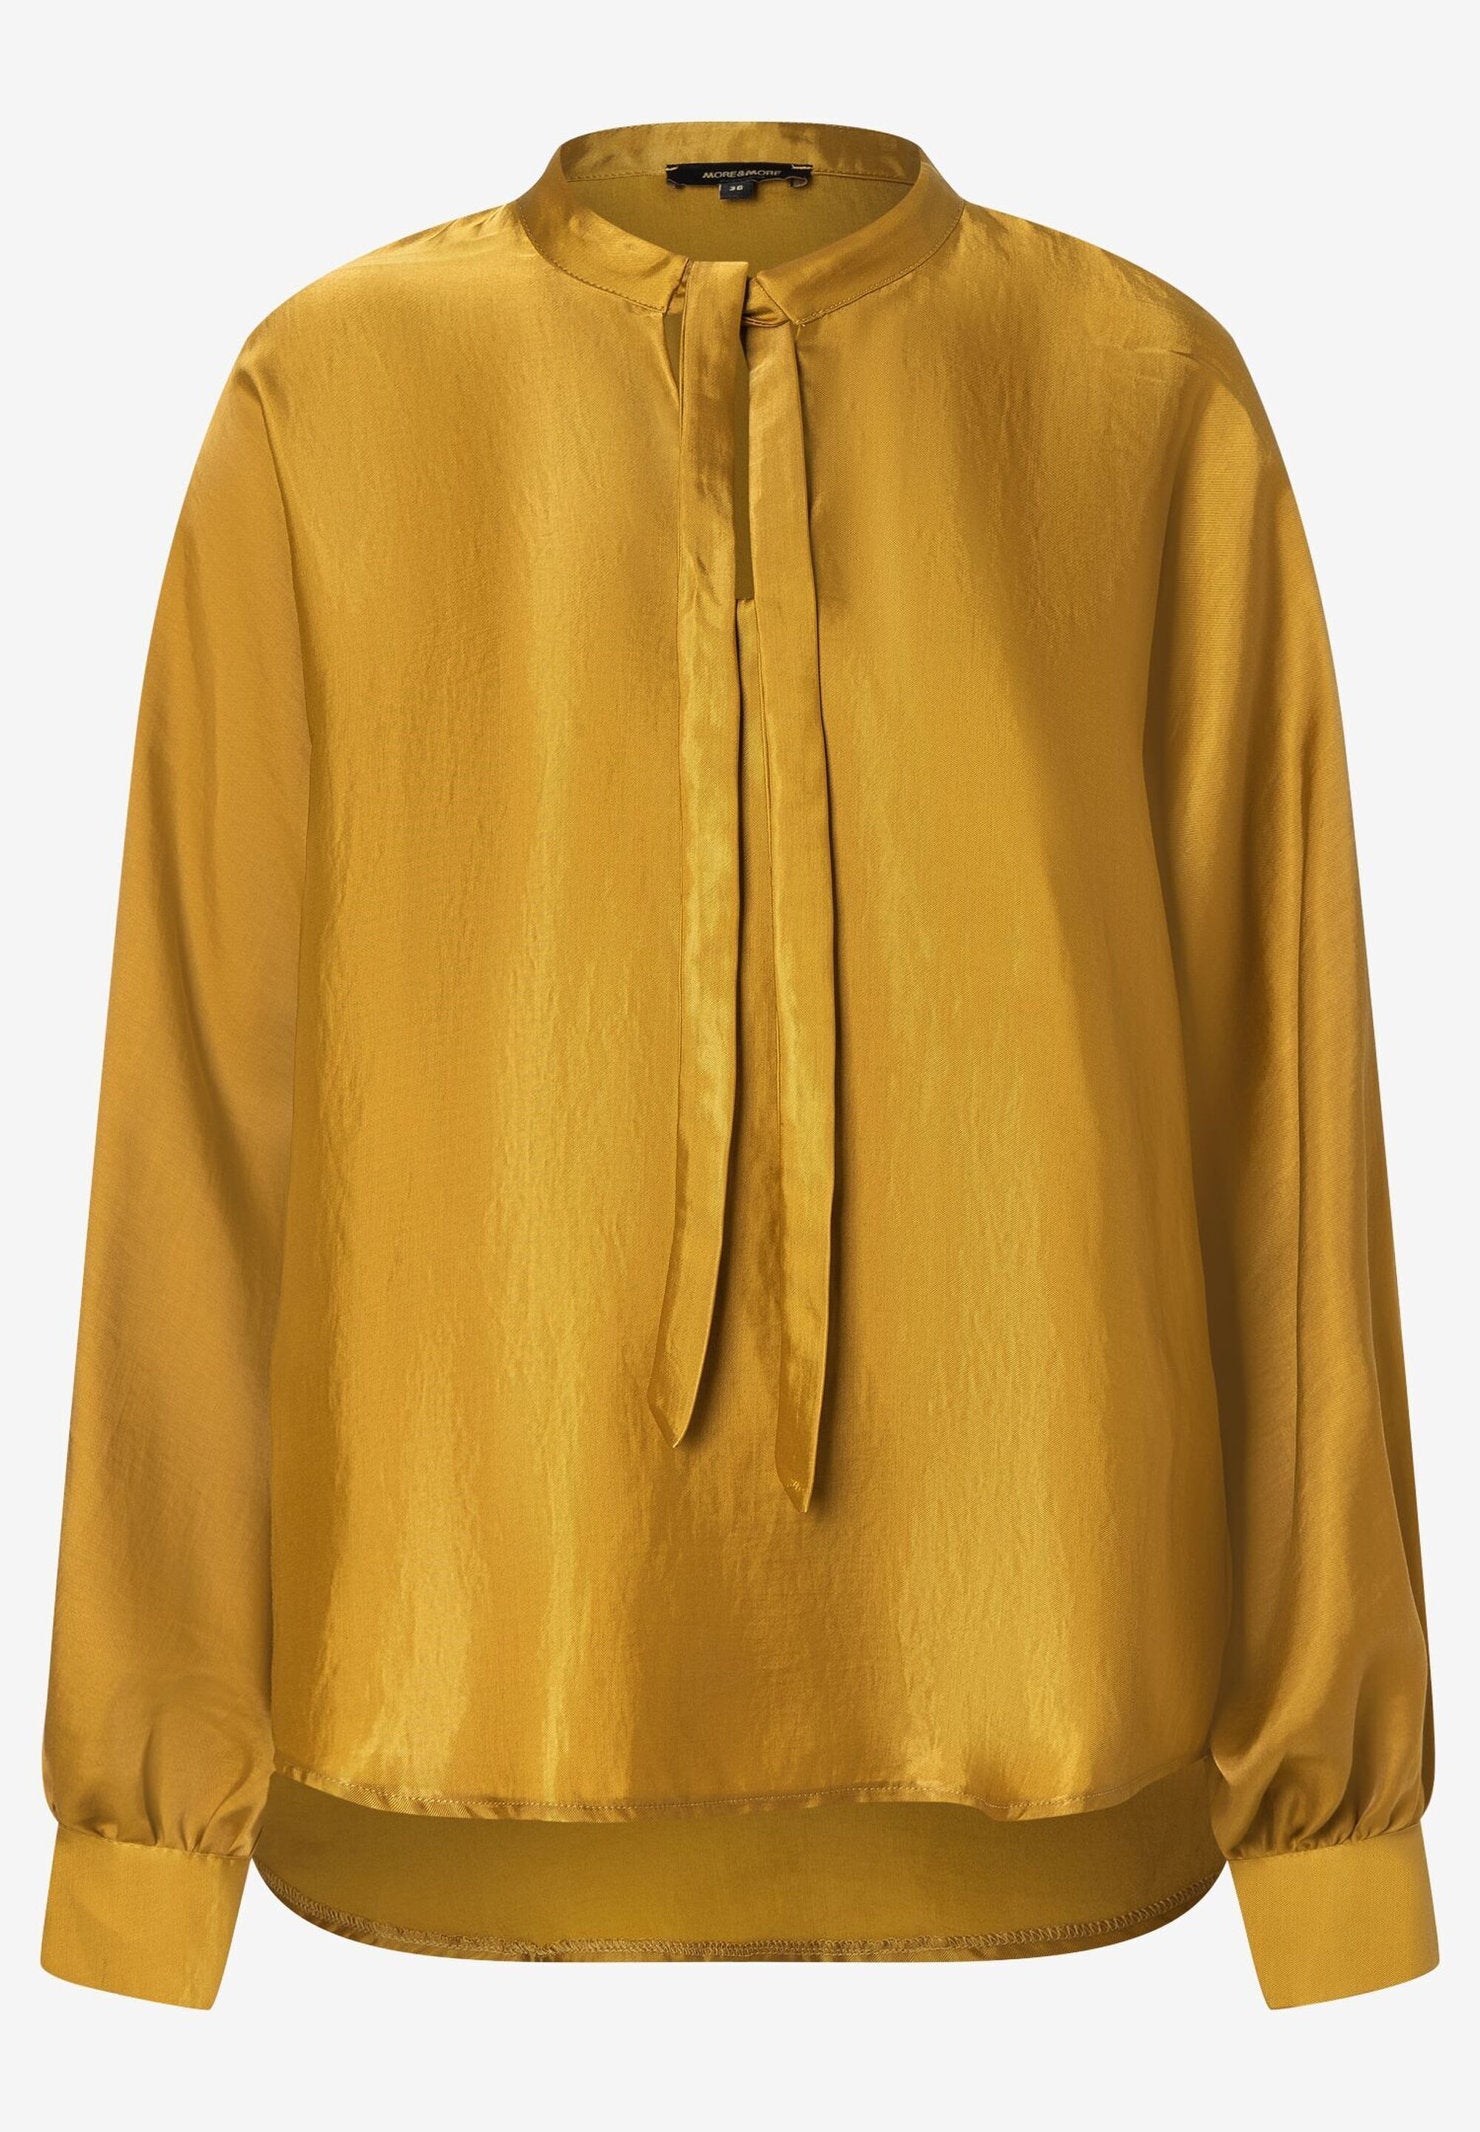 Mustard Yellow Satin Blouse With Bow_31122056_0175_03